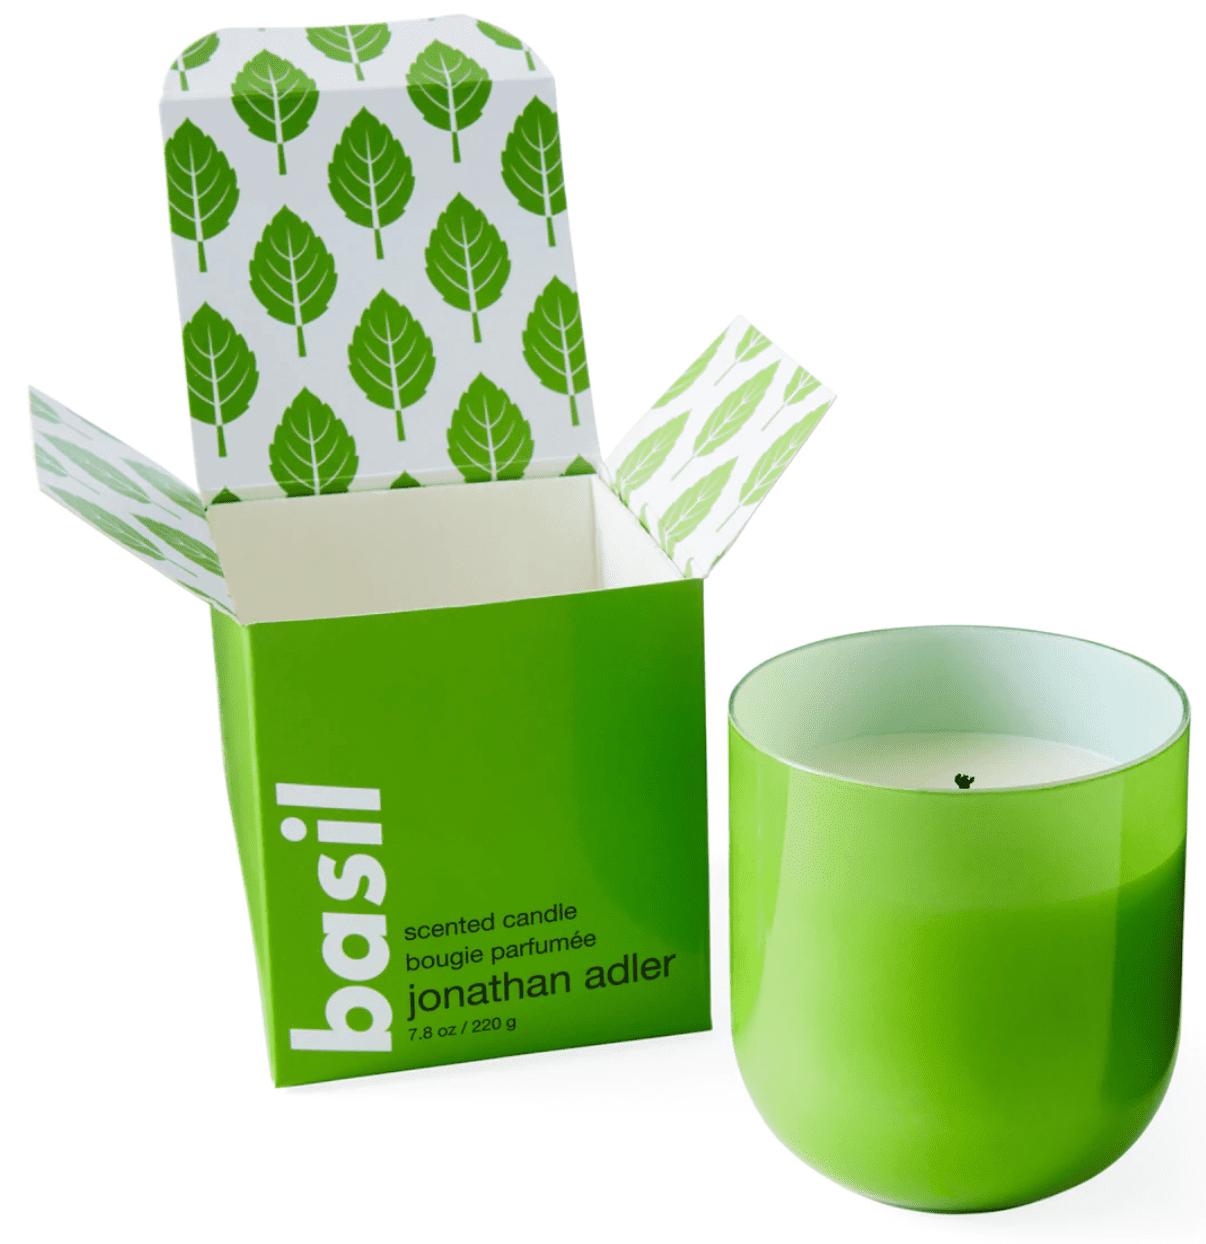 Bright green basil-scented candle with a green box